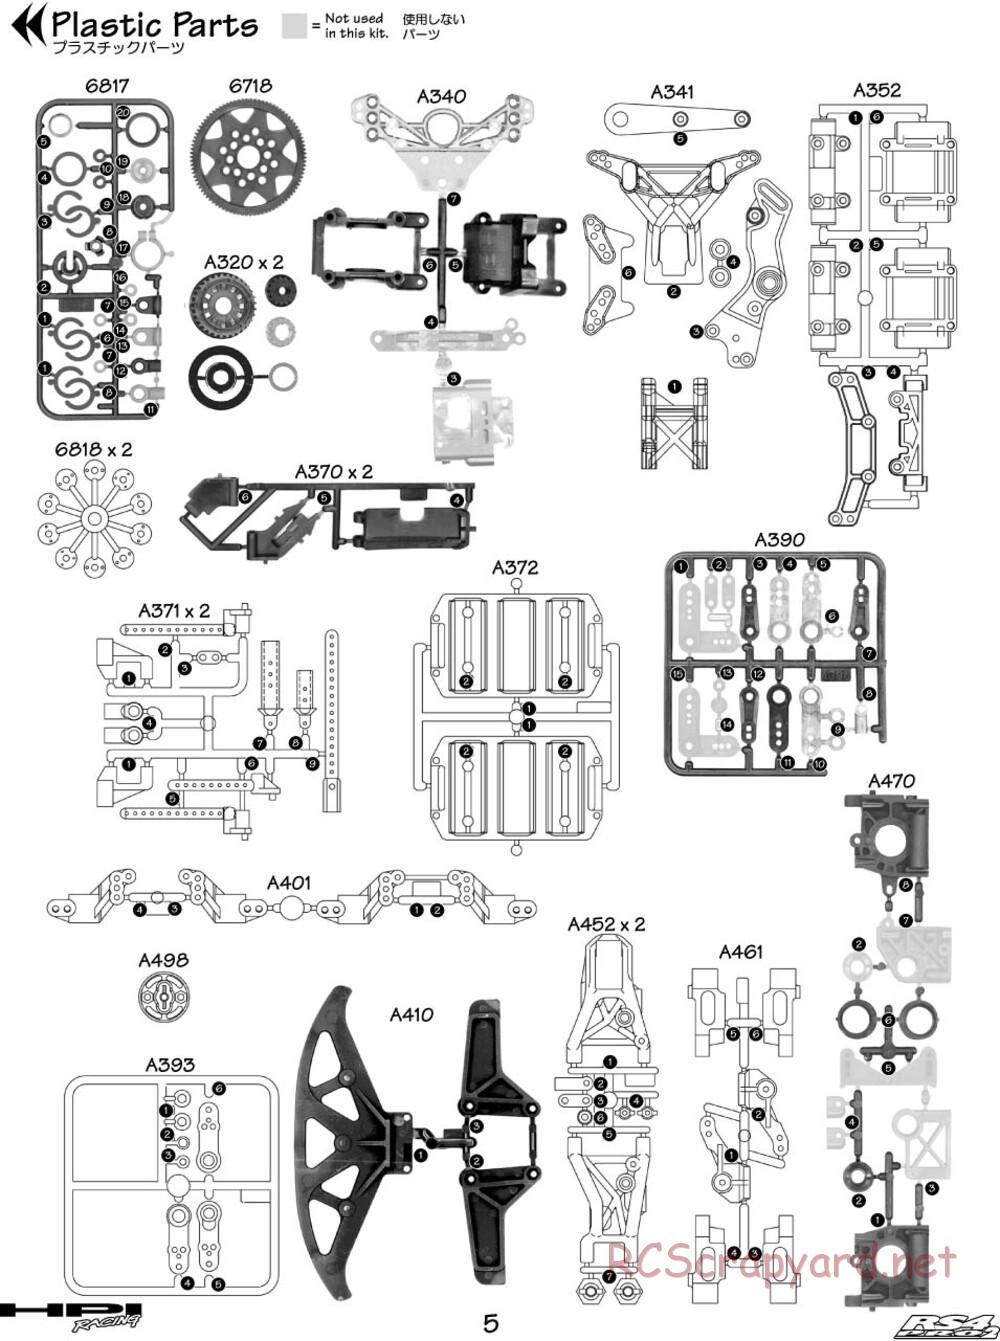 HPI - RS4 Pro 2 - Manual - Page 5